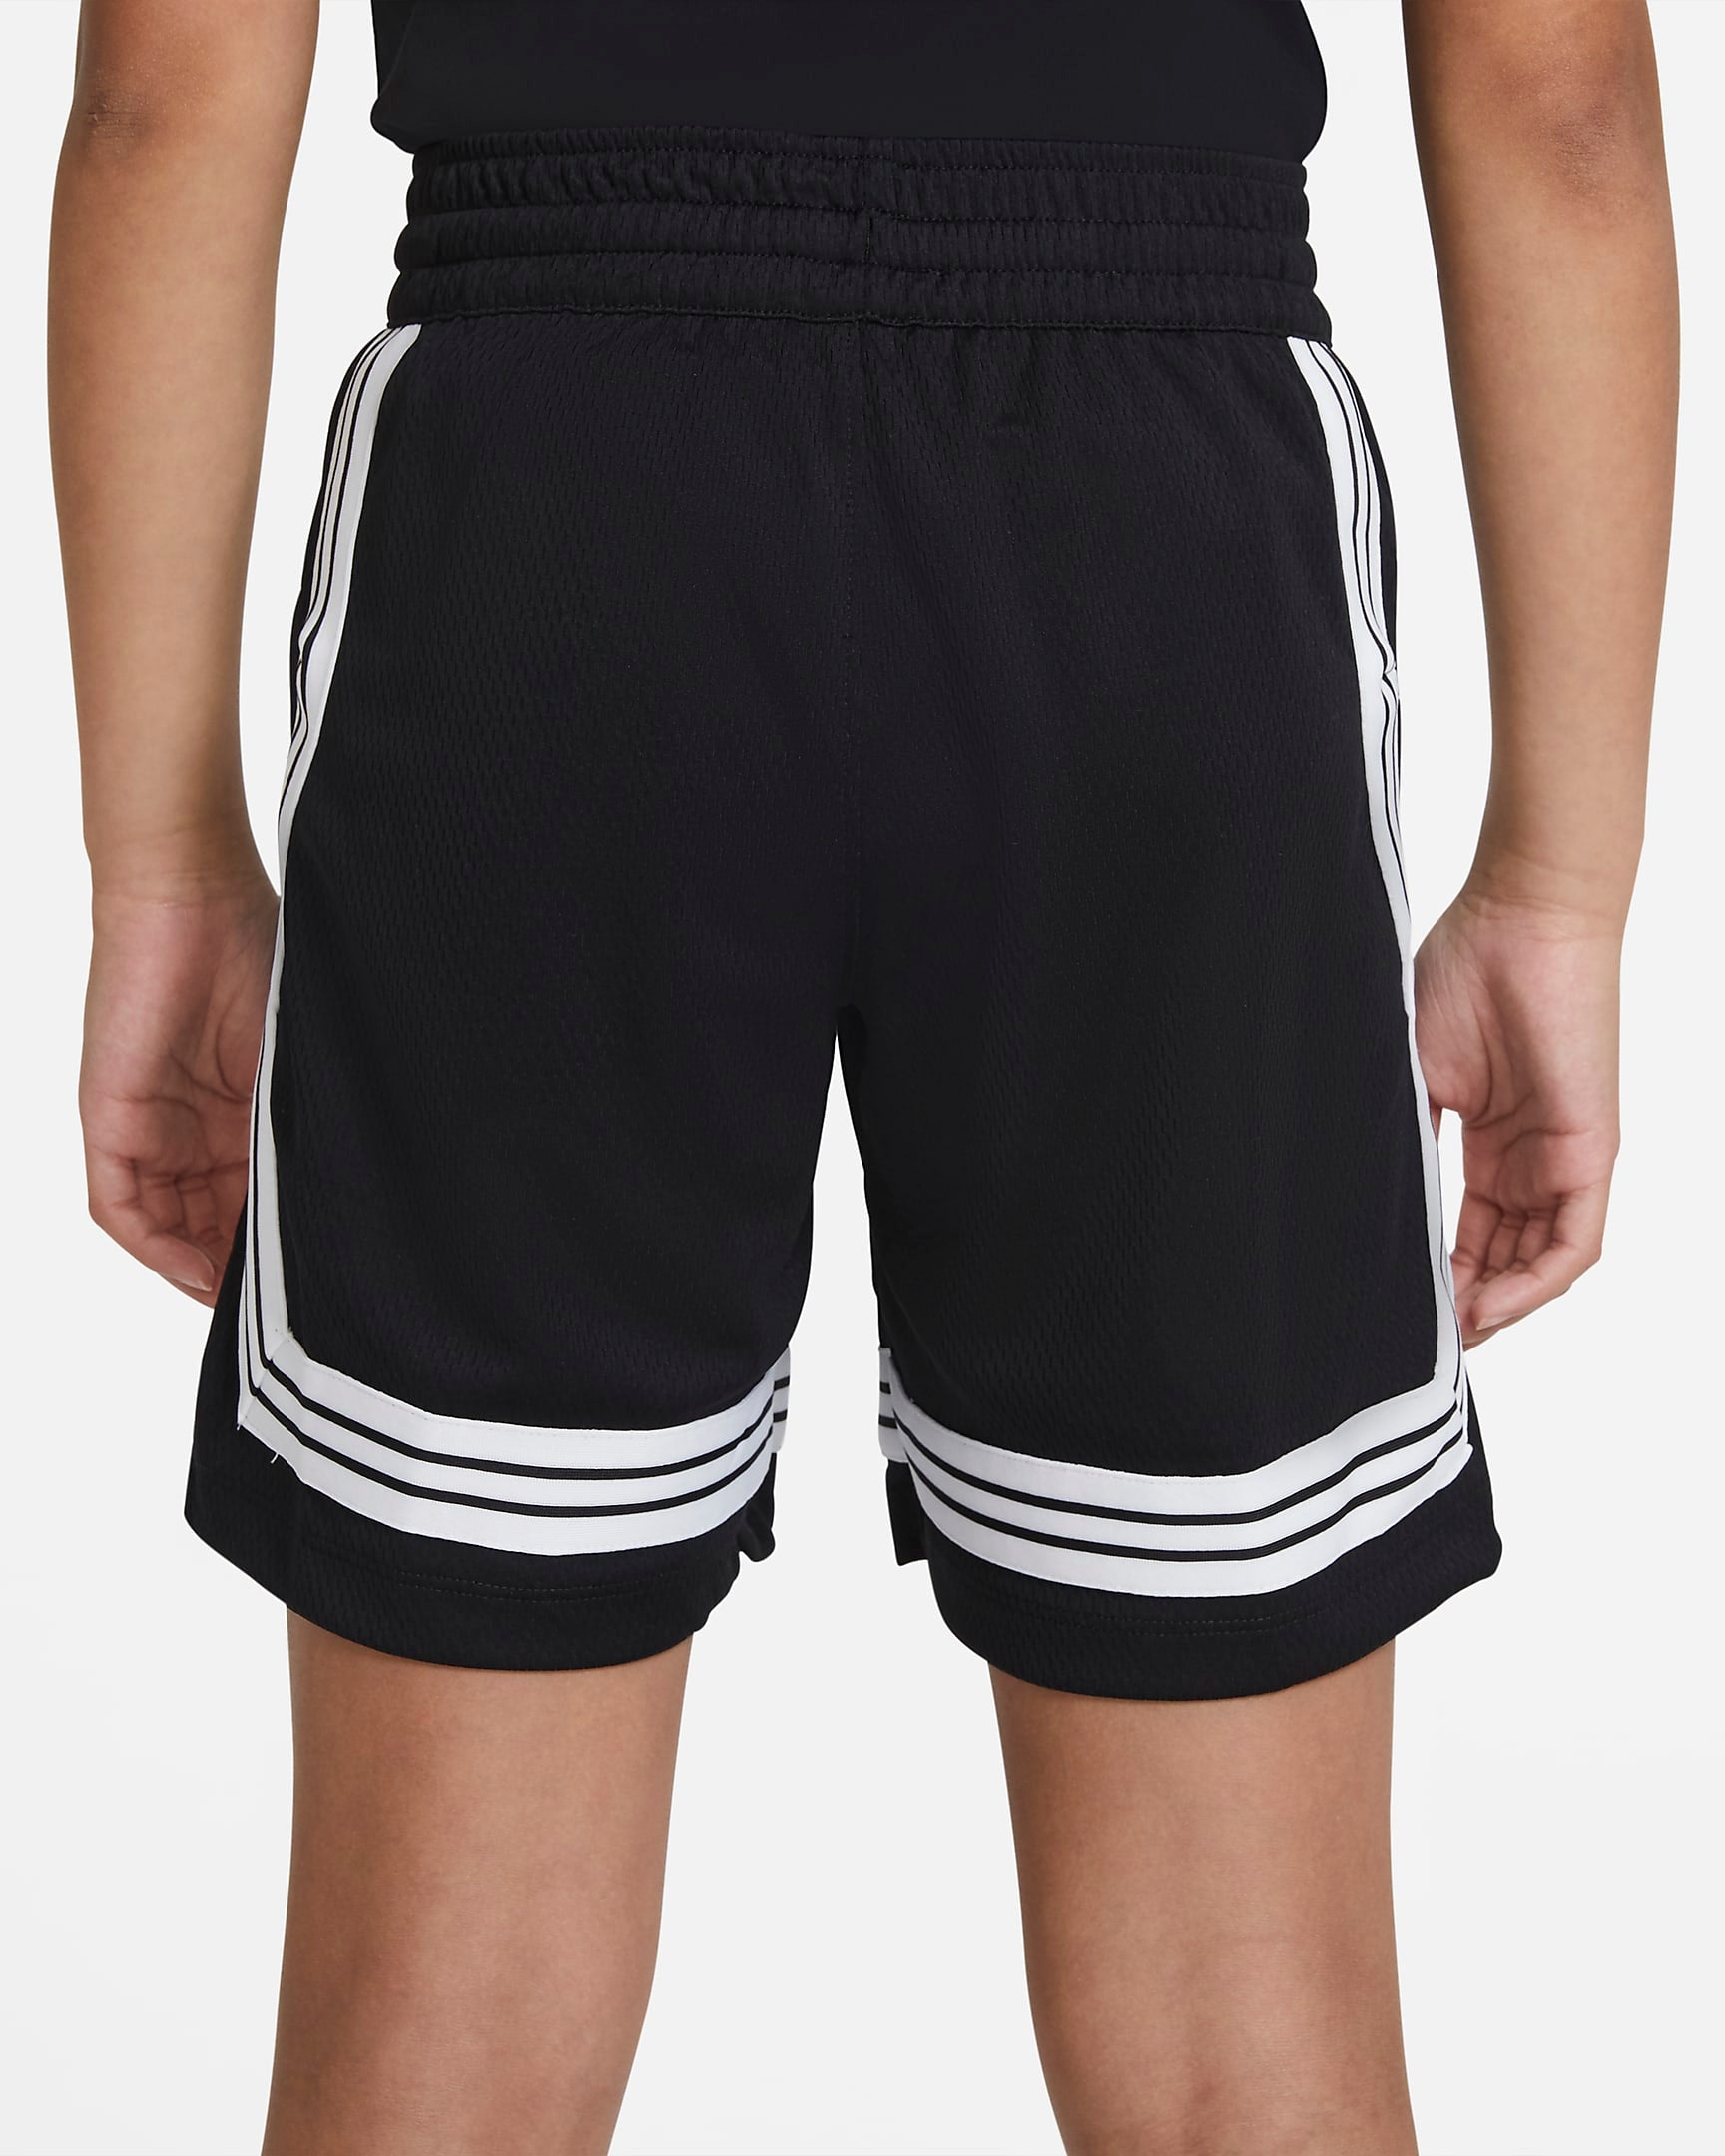 Nike Fly Crossover Basketball Shorts Girls – Ernie's Sports Experts